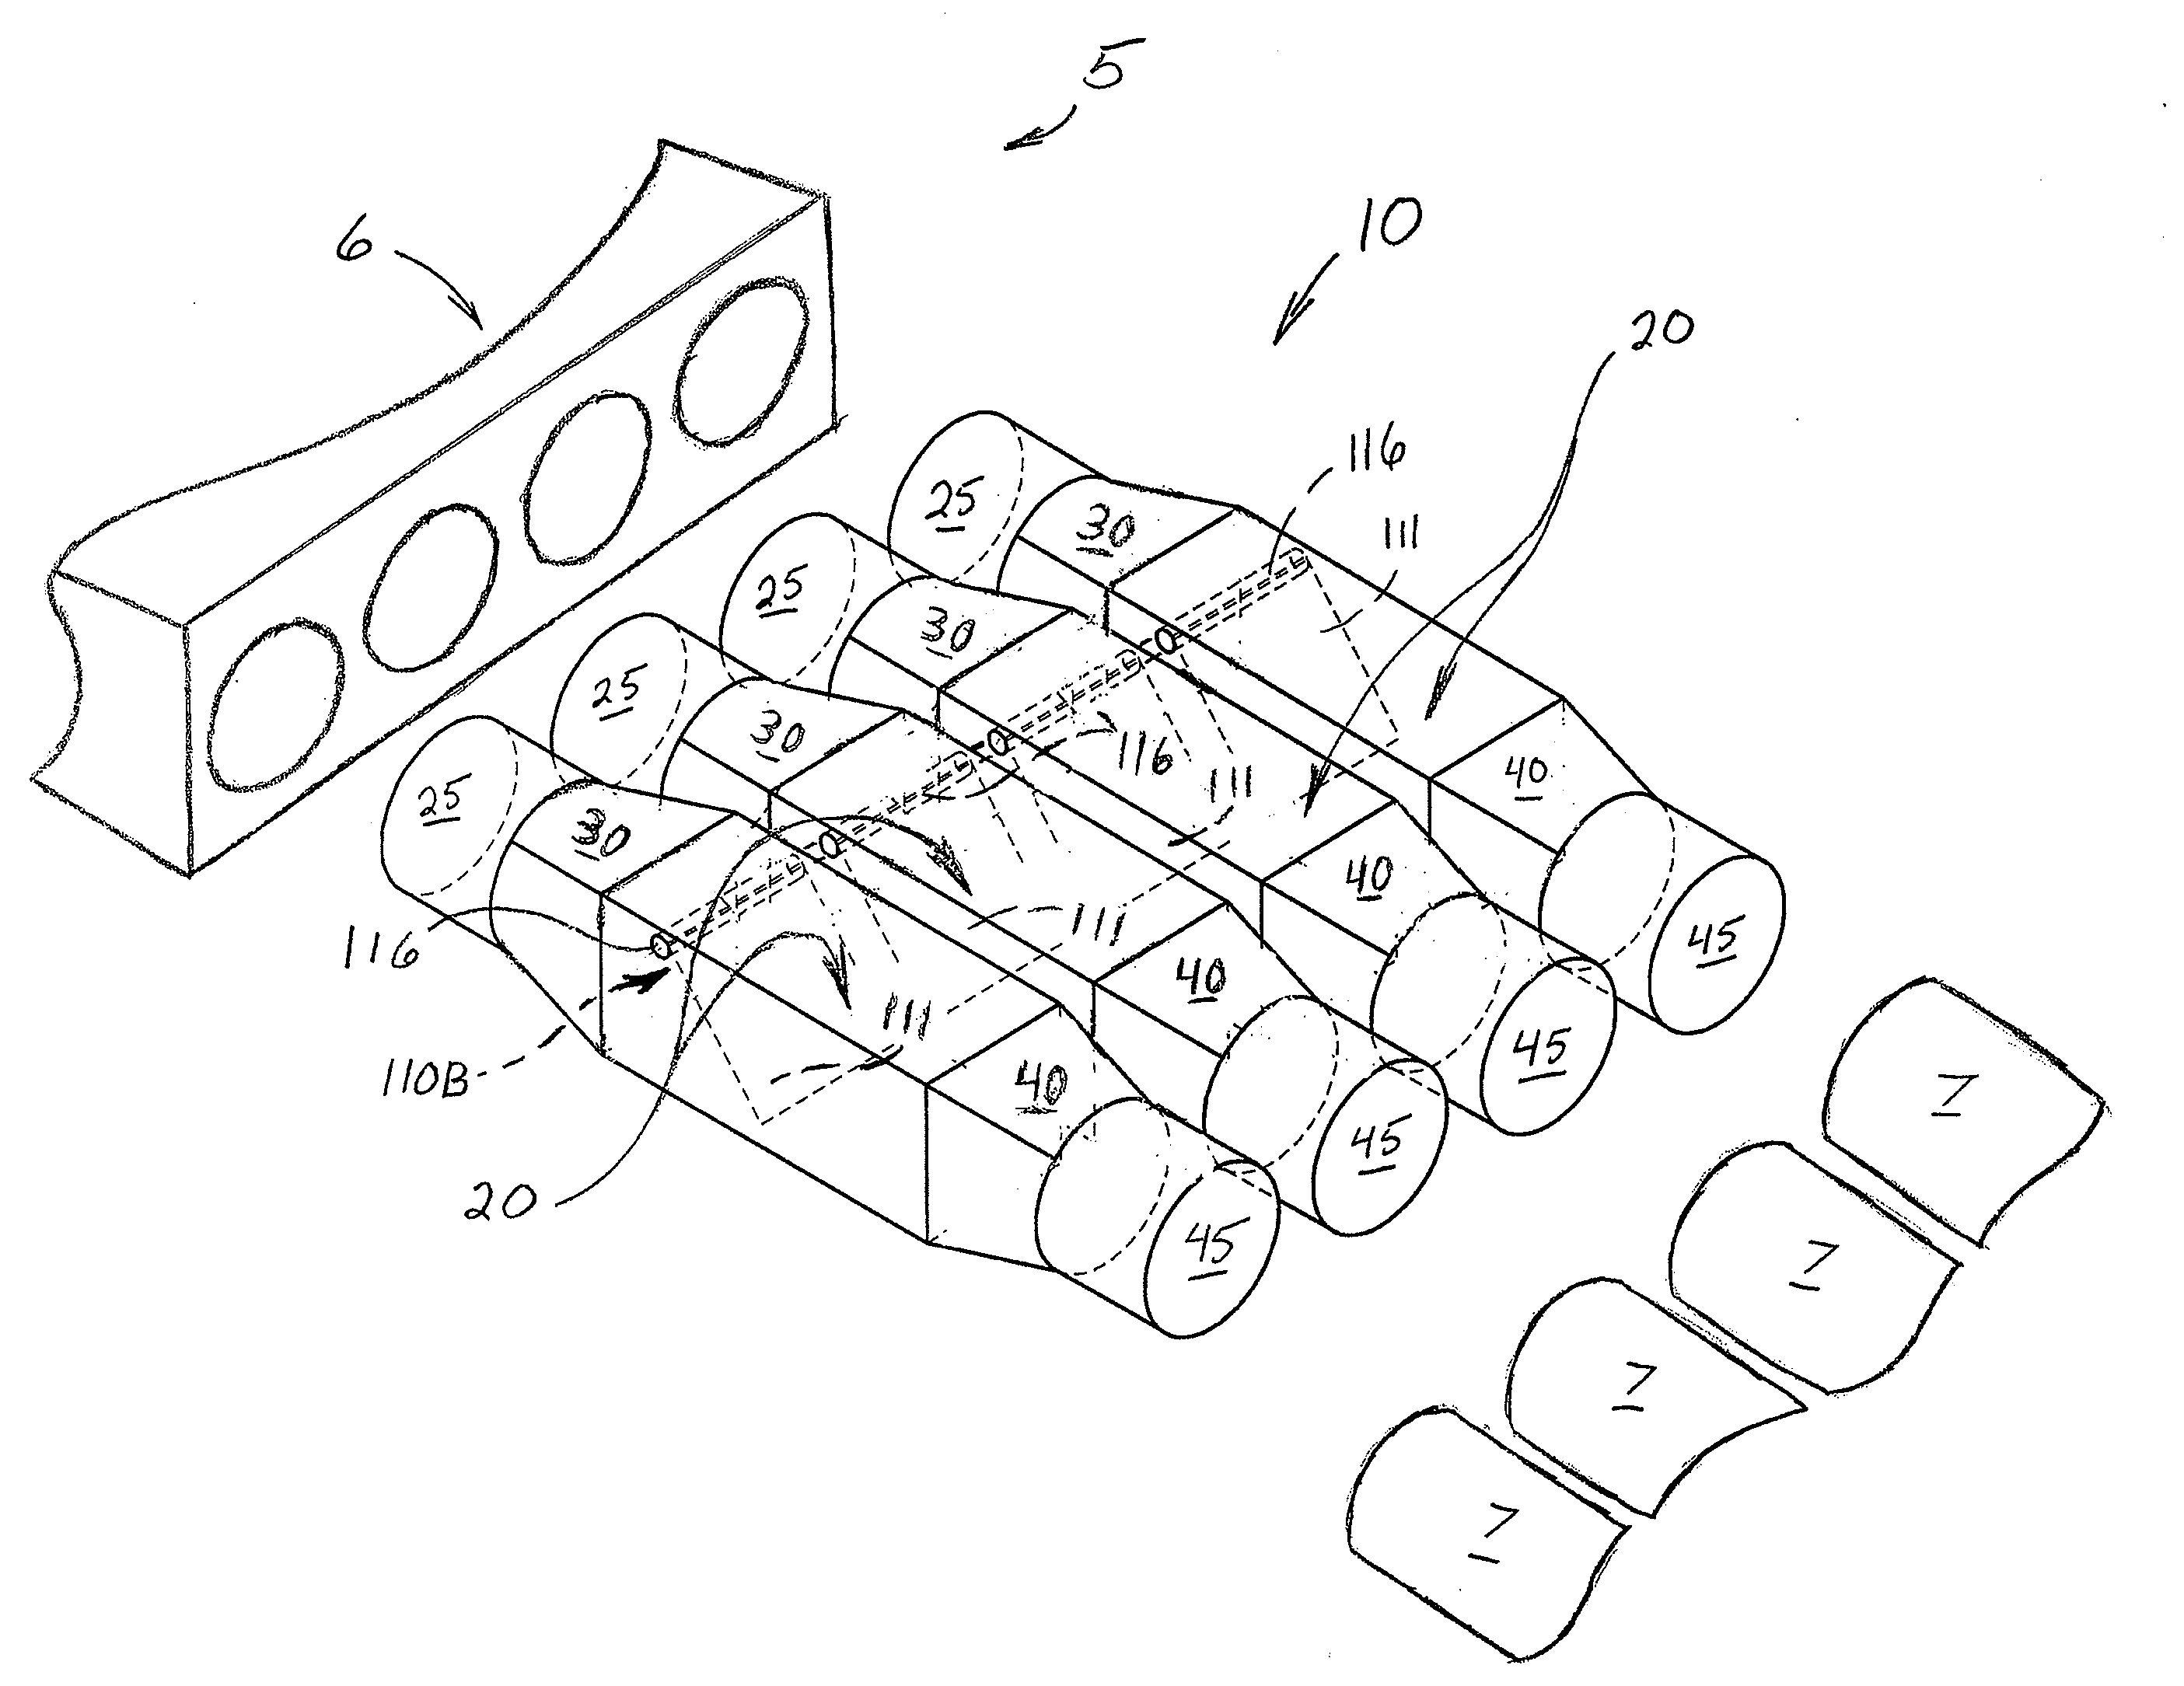 Air velocity indicator and control device